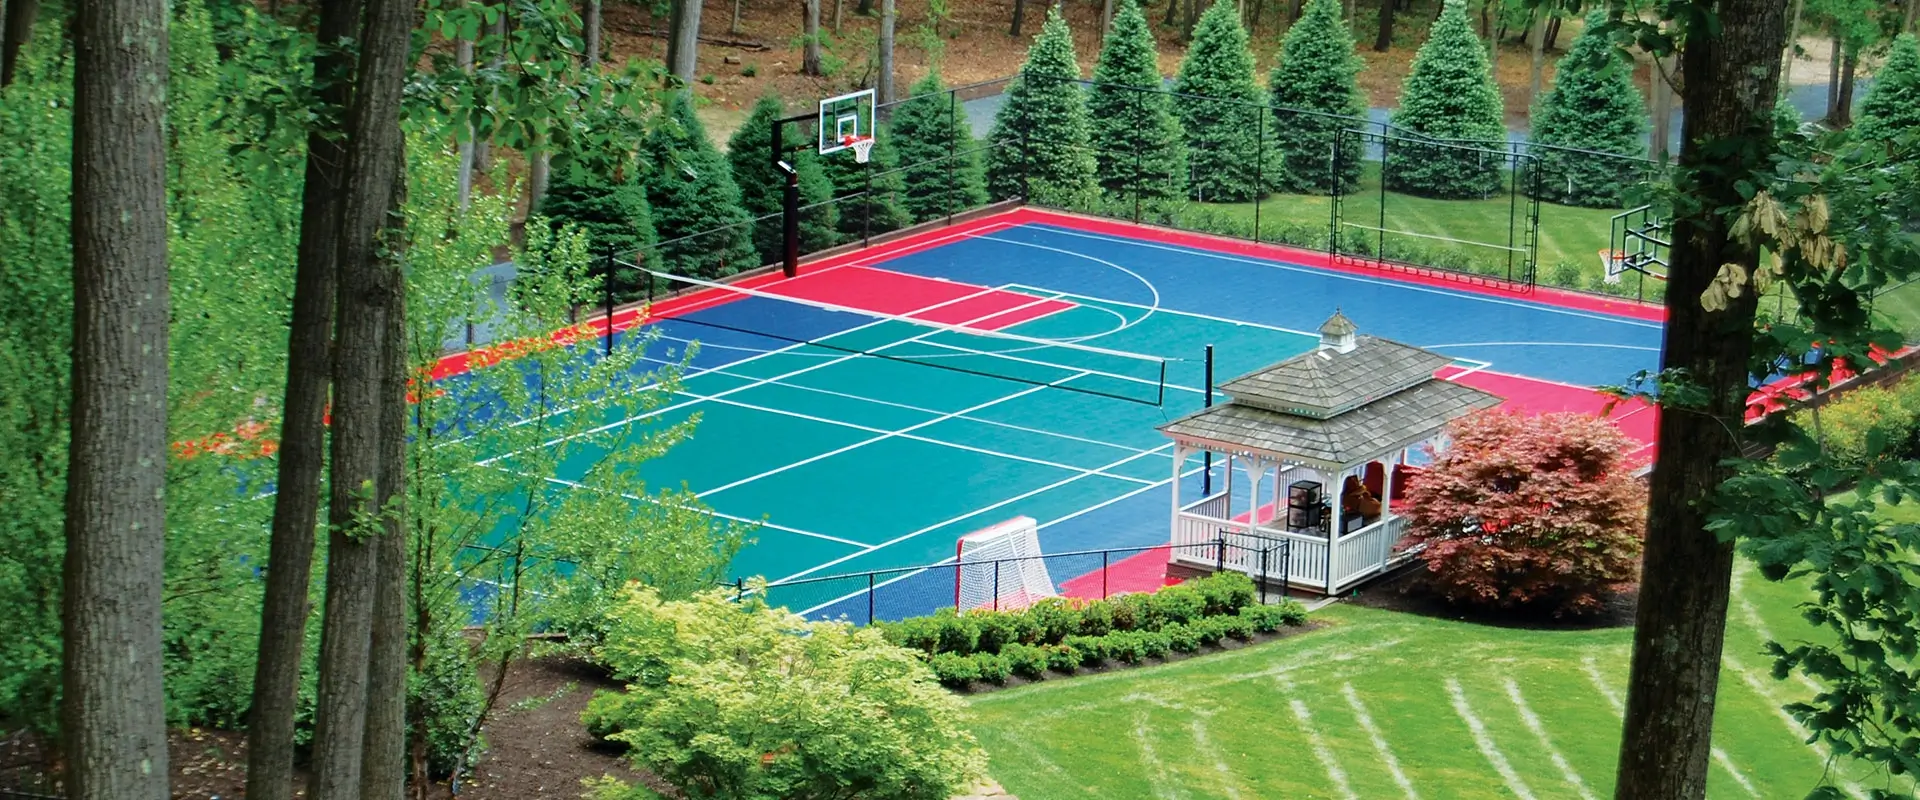 colorful multi-court in a large backyard